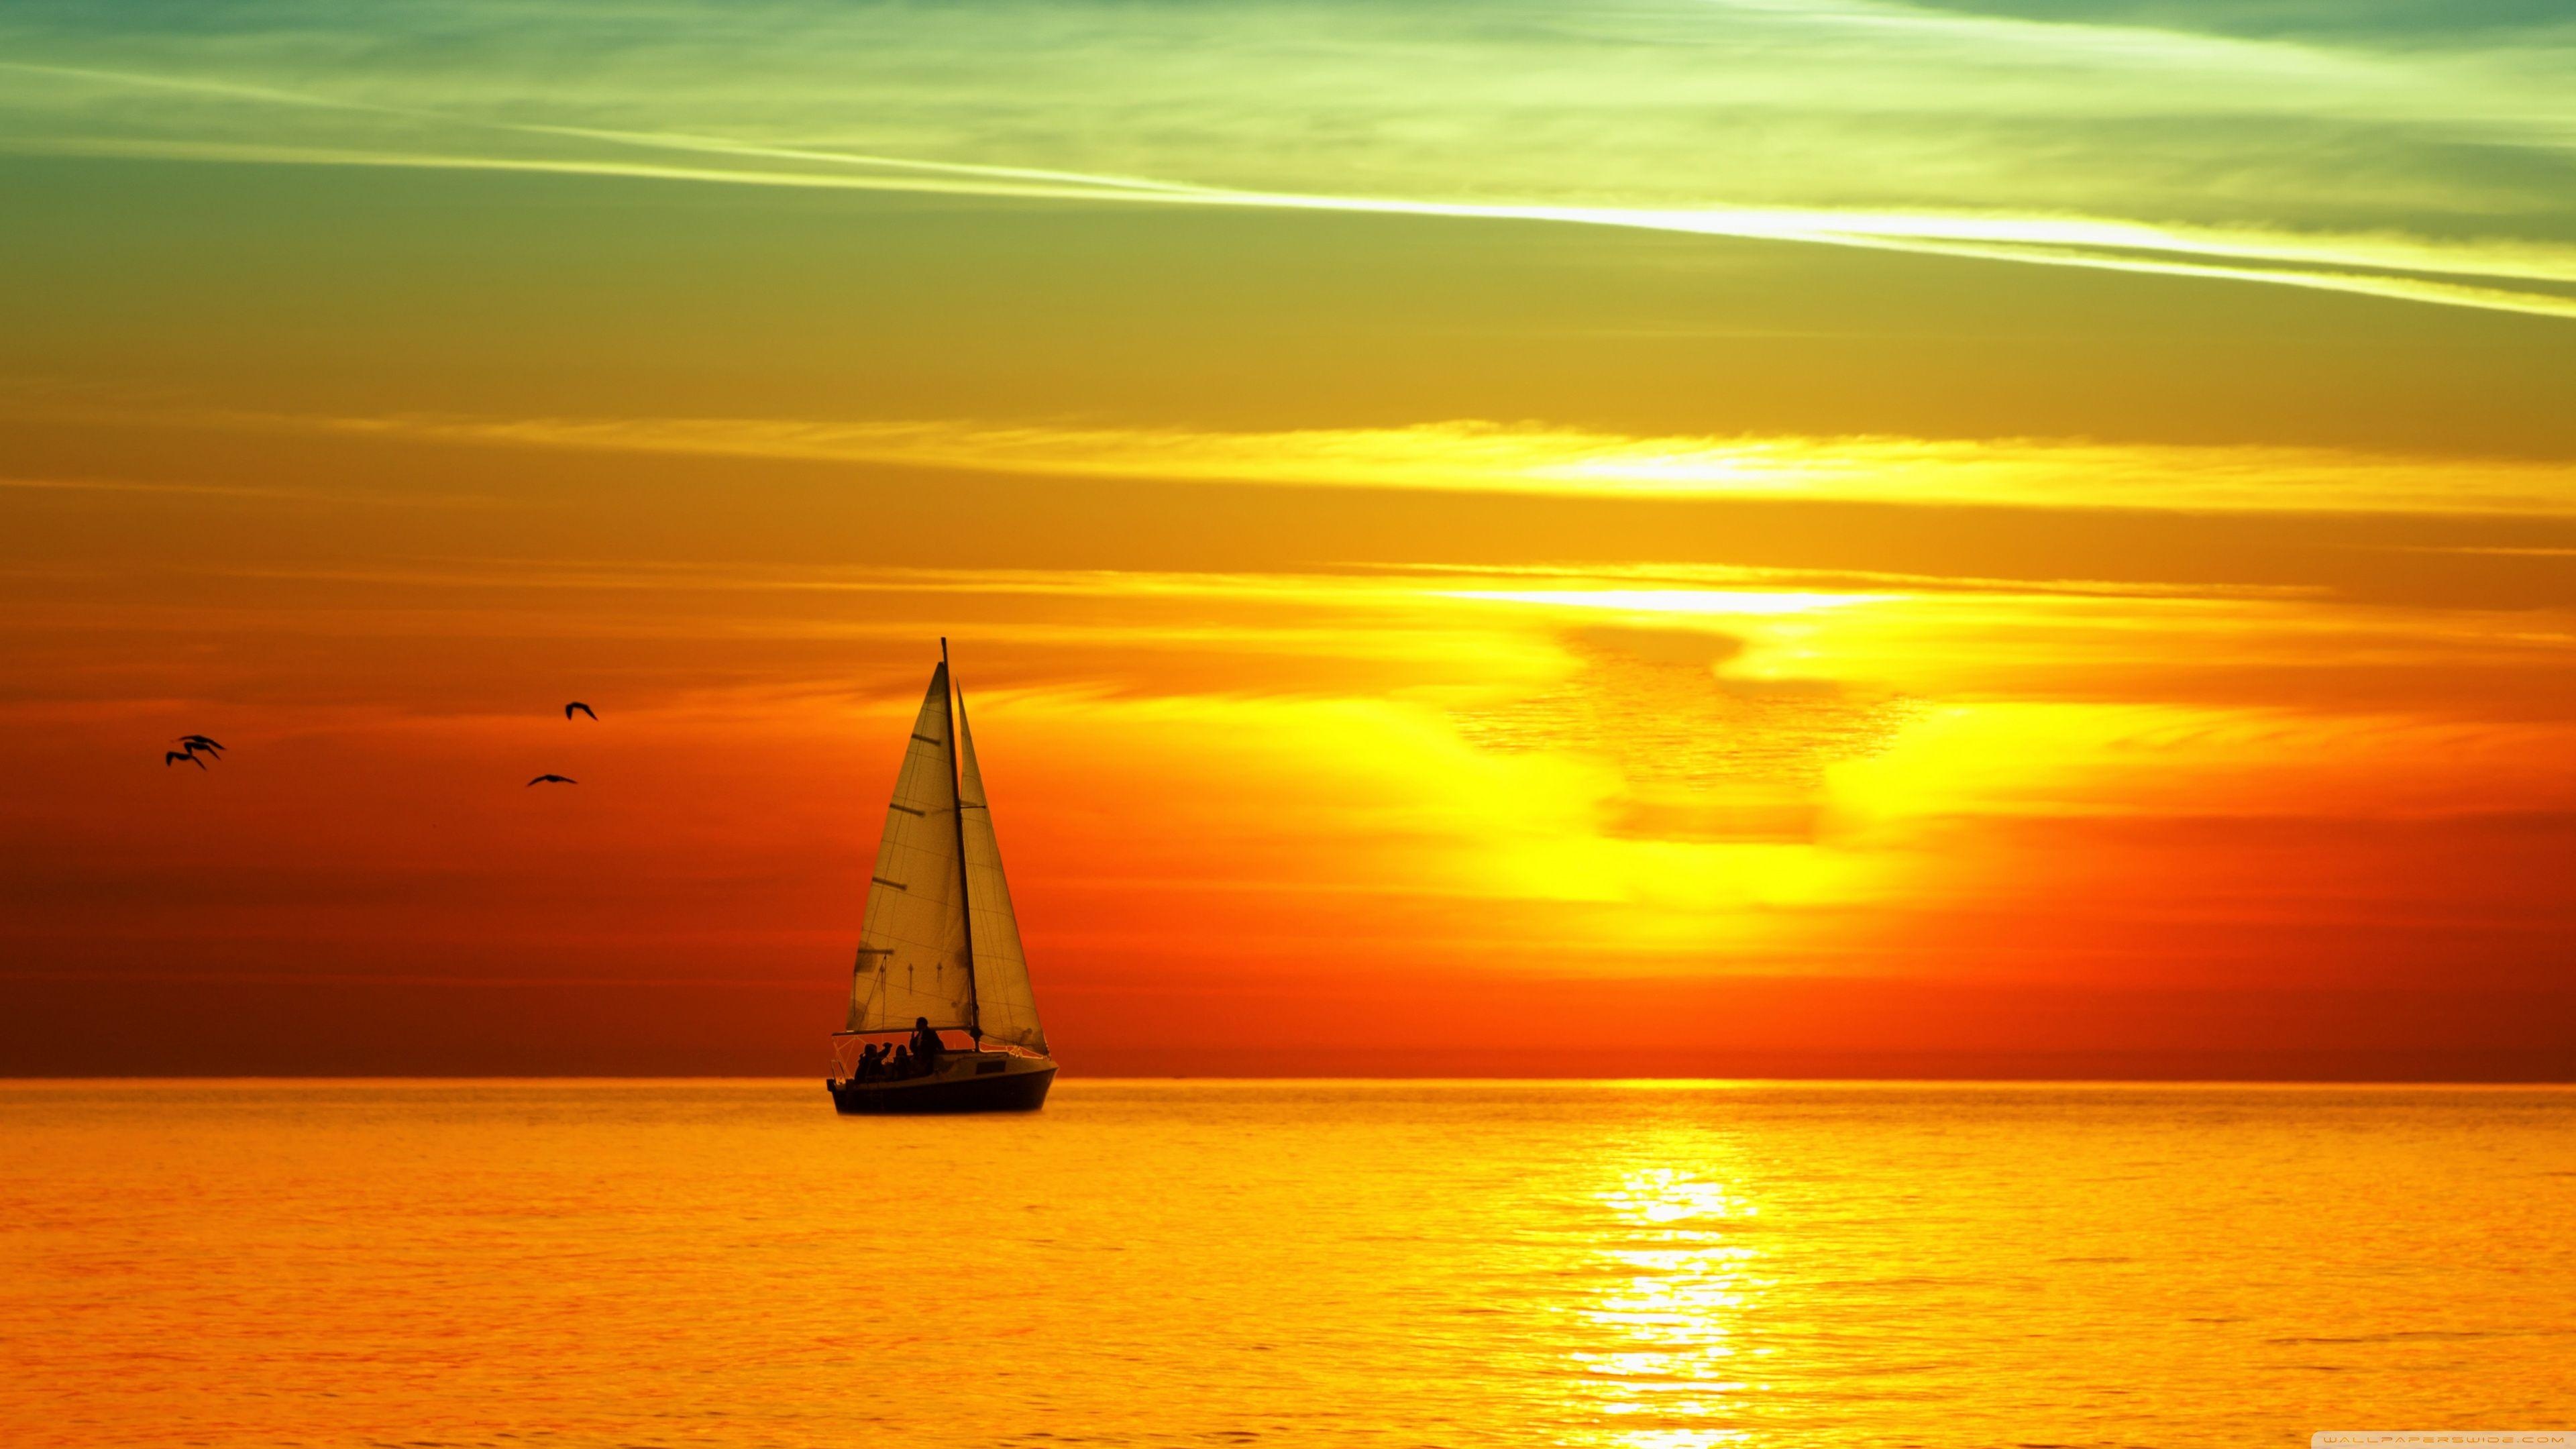 Sailing: Sunset, The activity of riding in a boat that's propelled by the wind, Yachting. 3840x2160 4K Wallpaper.